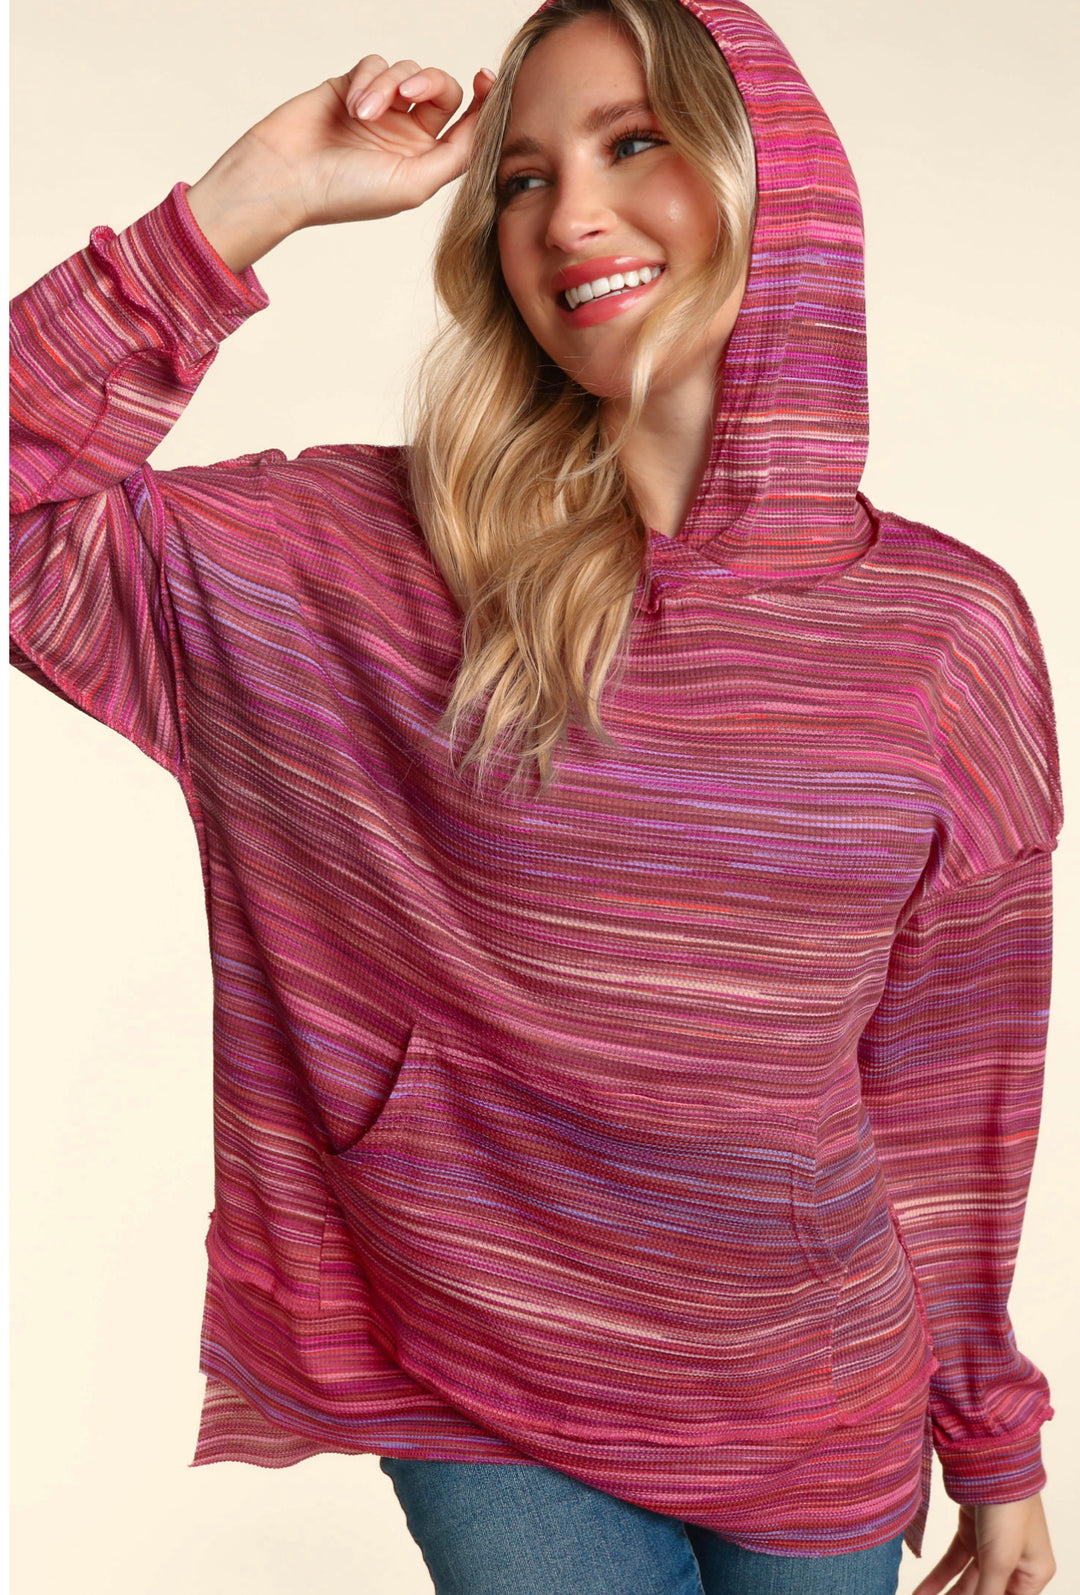 Ginny Multicolor Pullover Kangaroo Pocket Sweatshirt-Sweaters/Sweatshirts-Inspired by Justeen-Women's Clothing Boutique in Chicago, Illinois